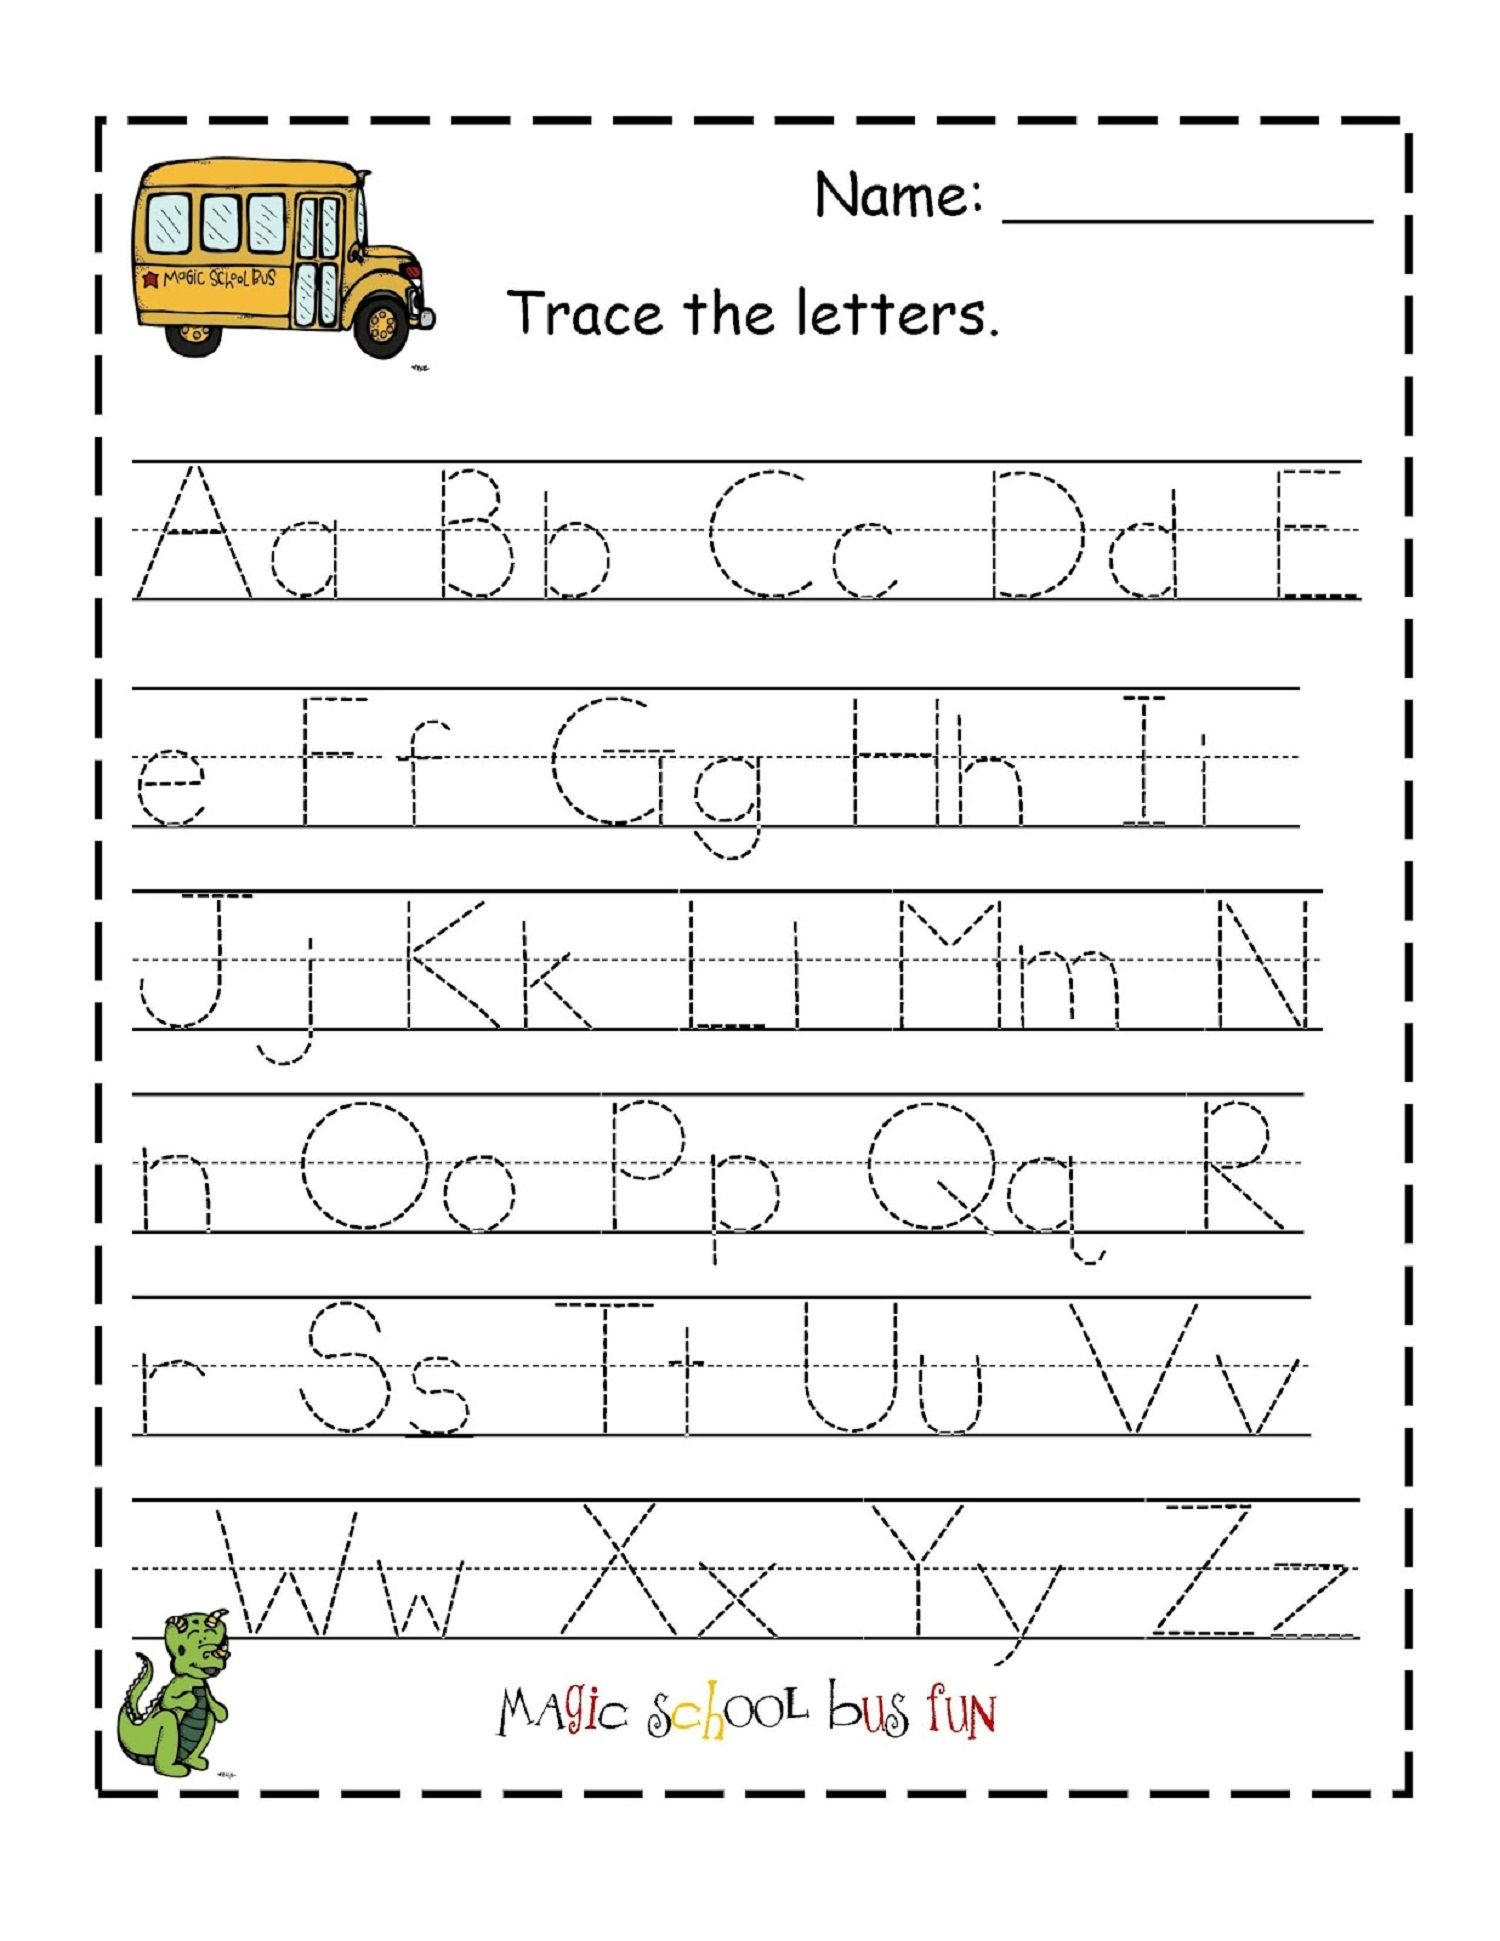 Traceable Alphabet For Learning Exercise | Alphabet Tracing regarding Alphabet Worksheets Traceable